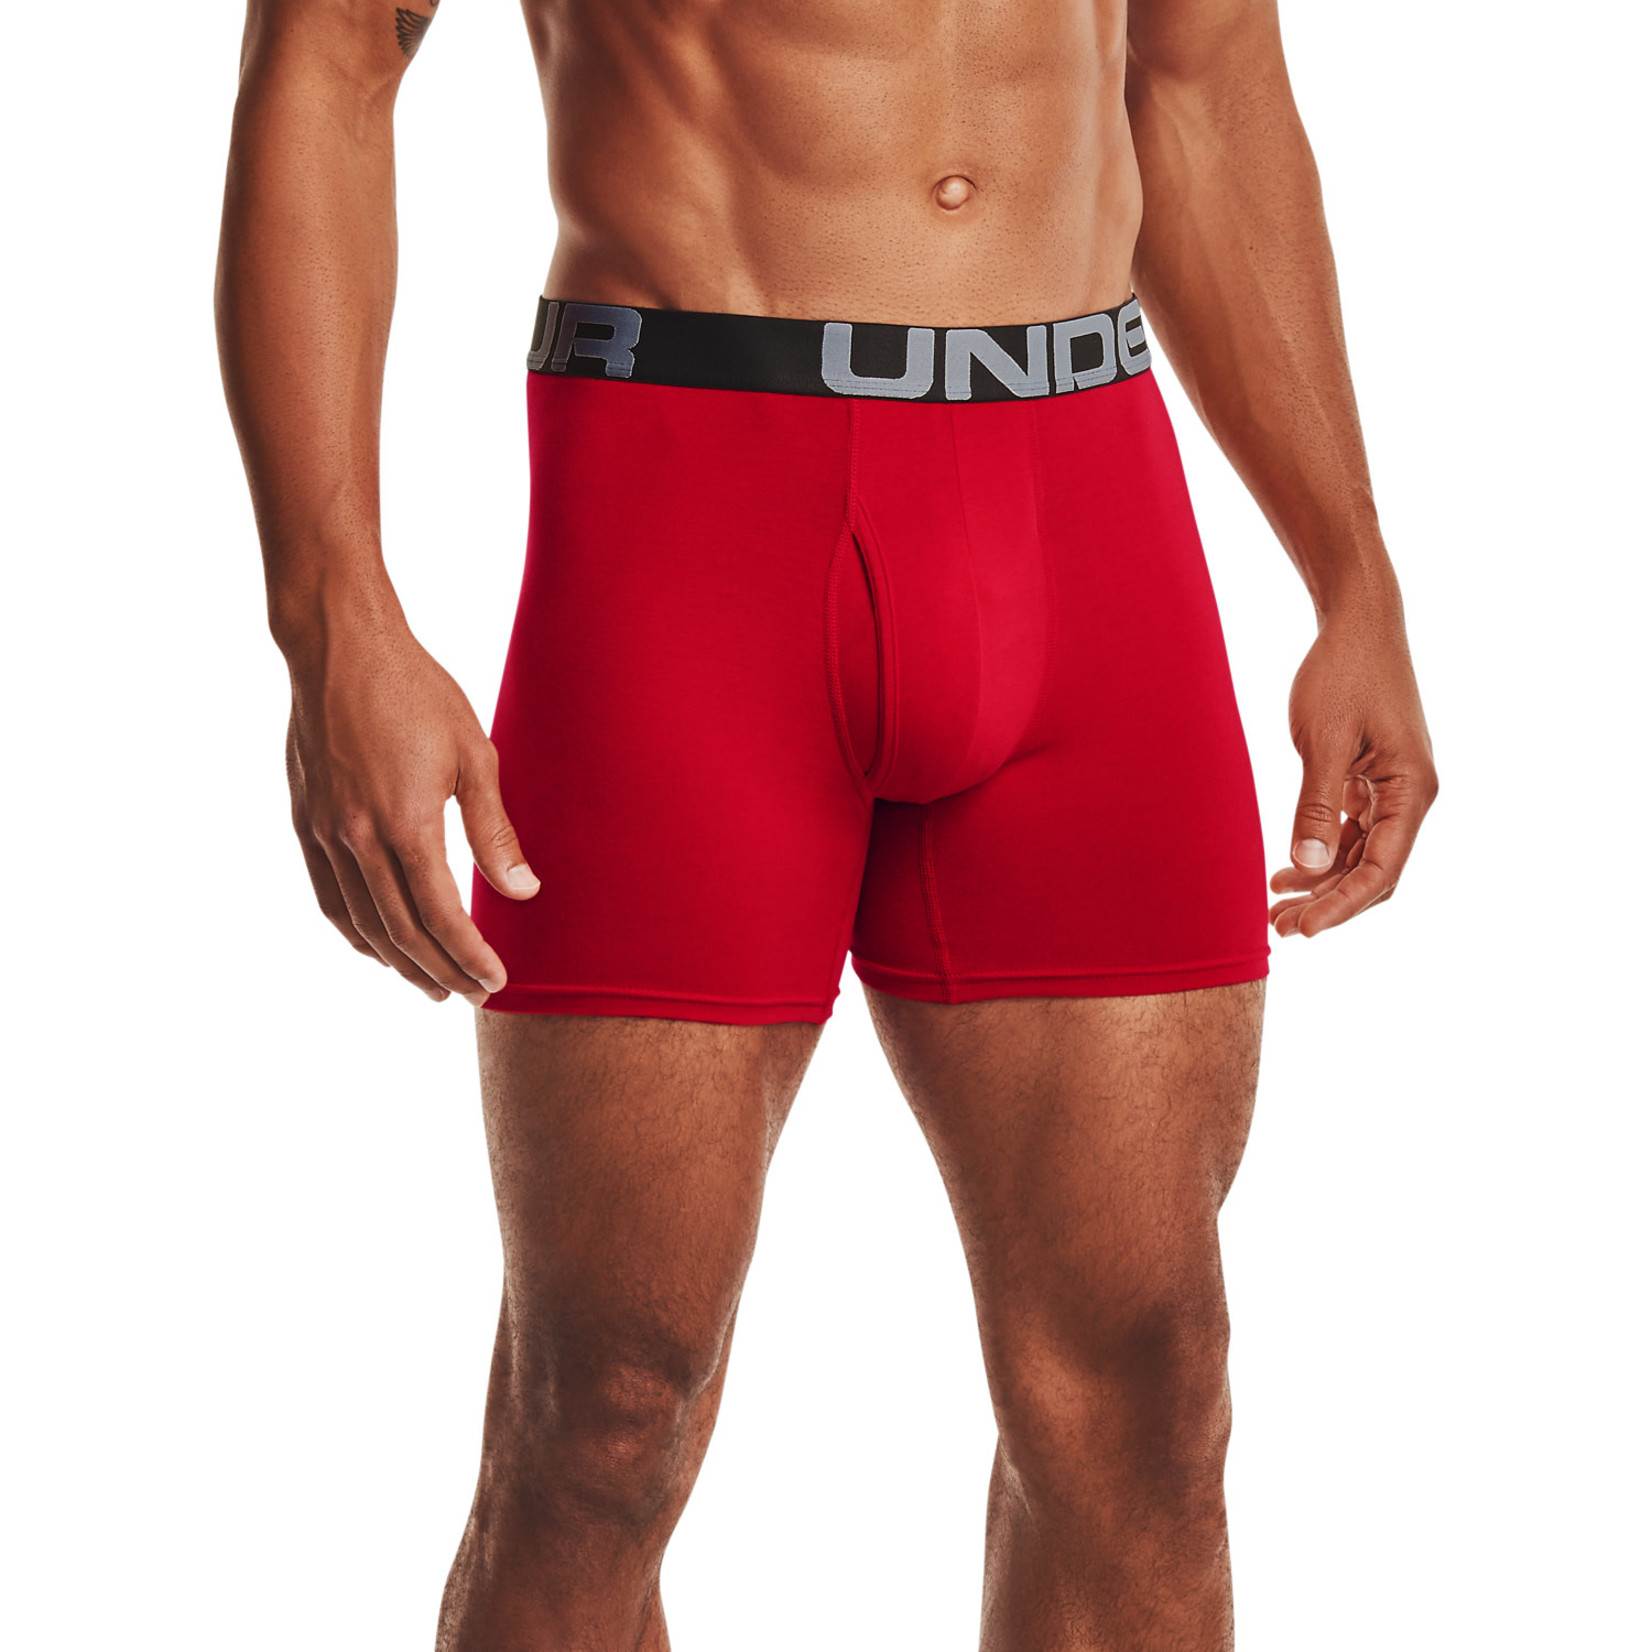 https://cdn.webshopapp.com/shops/241216/files/353575431/1652x1652x1/under-armour-ua-charged-cotton-6in-3-pack-red.jpg